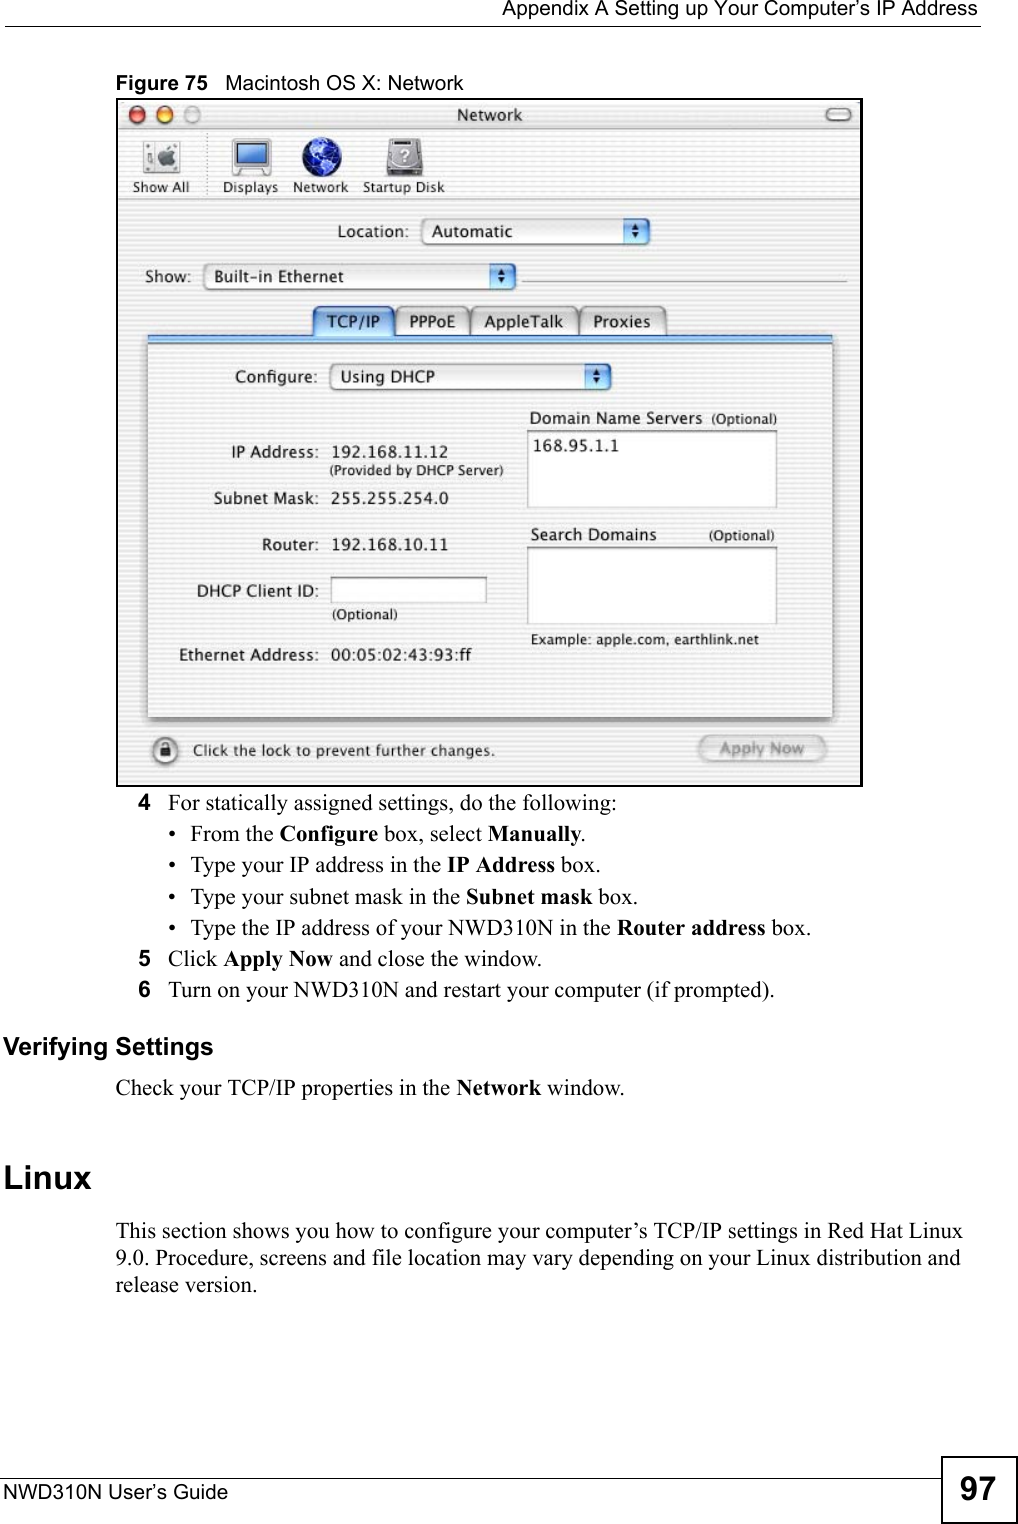  Appendix A Setting up Your Computer’s IP AddressNWD310N User’s Guide 97Figure 75   Macintosh OS X: Network4For statically assigned settings, do the following:•From the Configure box, select Manually.• Type your IP address in the IP Address box.• Type your subnet mask in the Subnet mask box.• Type the IP address of your NWD310N in the Router address box.5Click Apply Now and close the window.6Turn on your NWD310N and restart your computer (if prompted).Verifying SettingsCheck your TCP/IP properties in the Network window.Linux This section shows you how to configure your computer’s TCP/IP settings in Red Hat Linux 9.0. Procedure, screens and file location may vary depending on your Linux distribution and release version. 